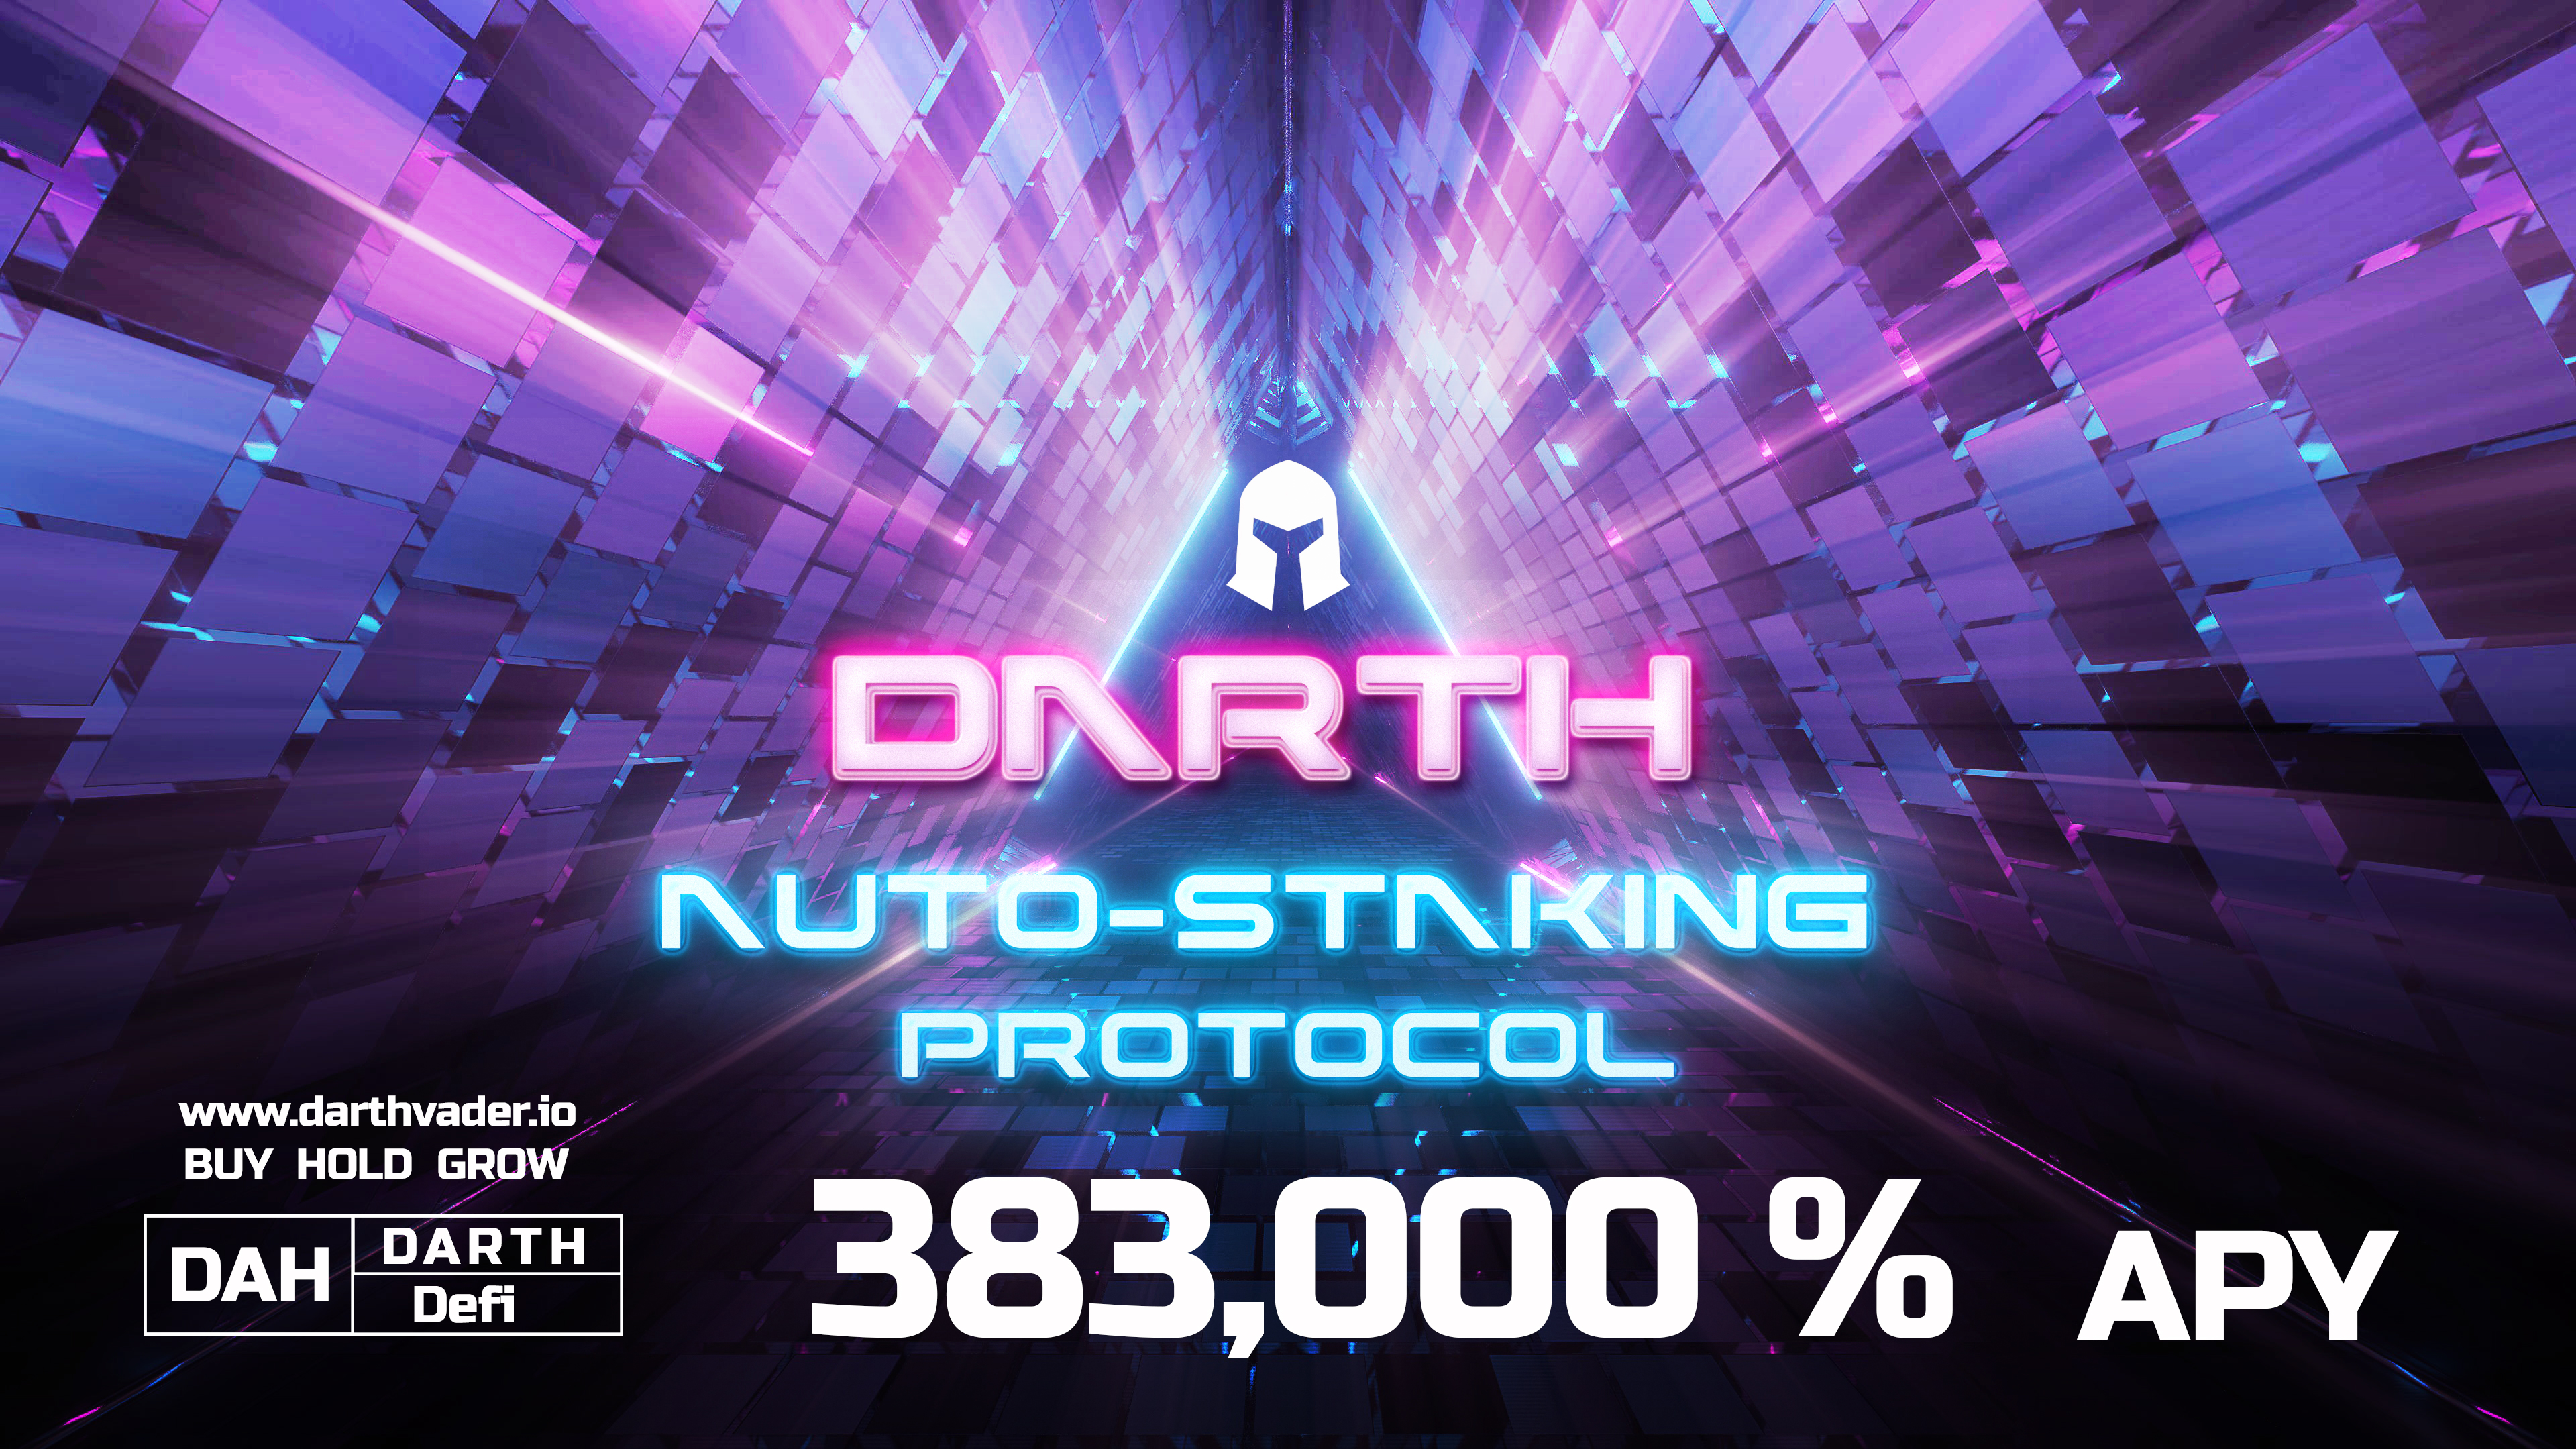 DARTH - Launches DeFi's Most Powerful Automatic-staking, gains up to 383,000% APY